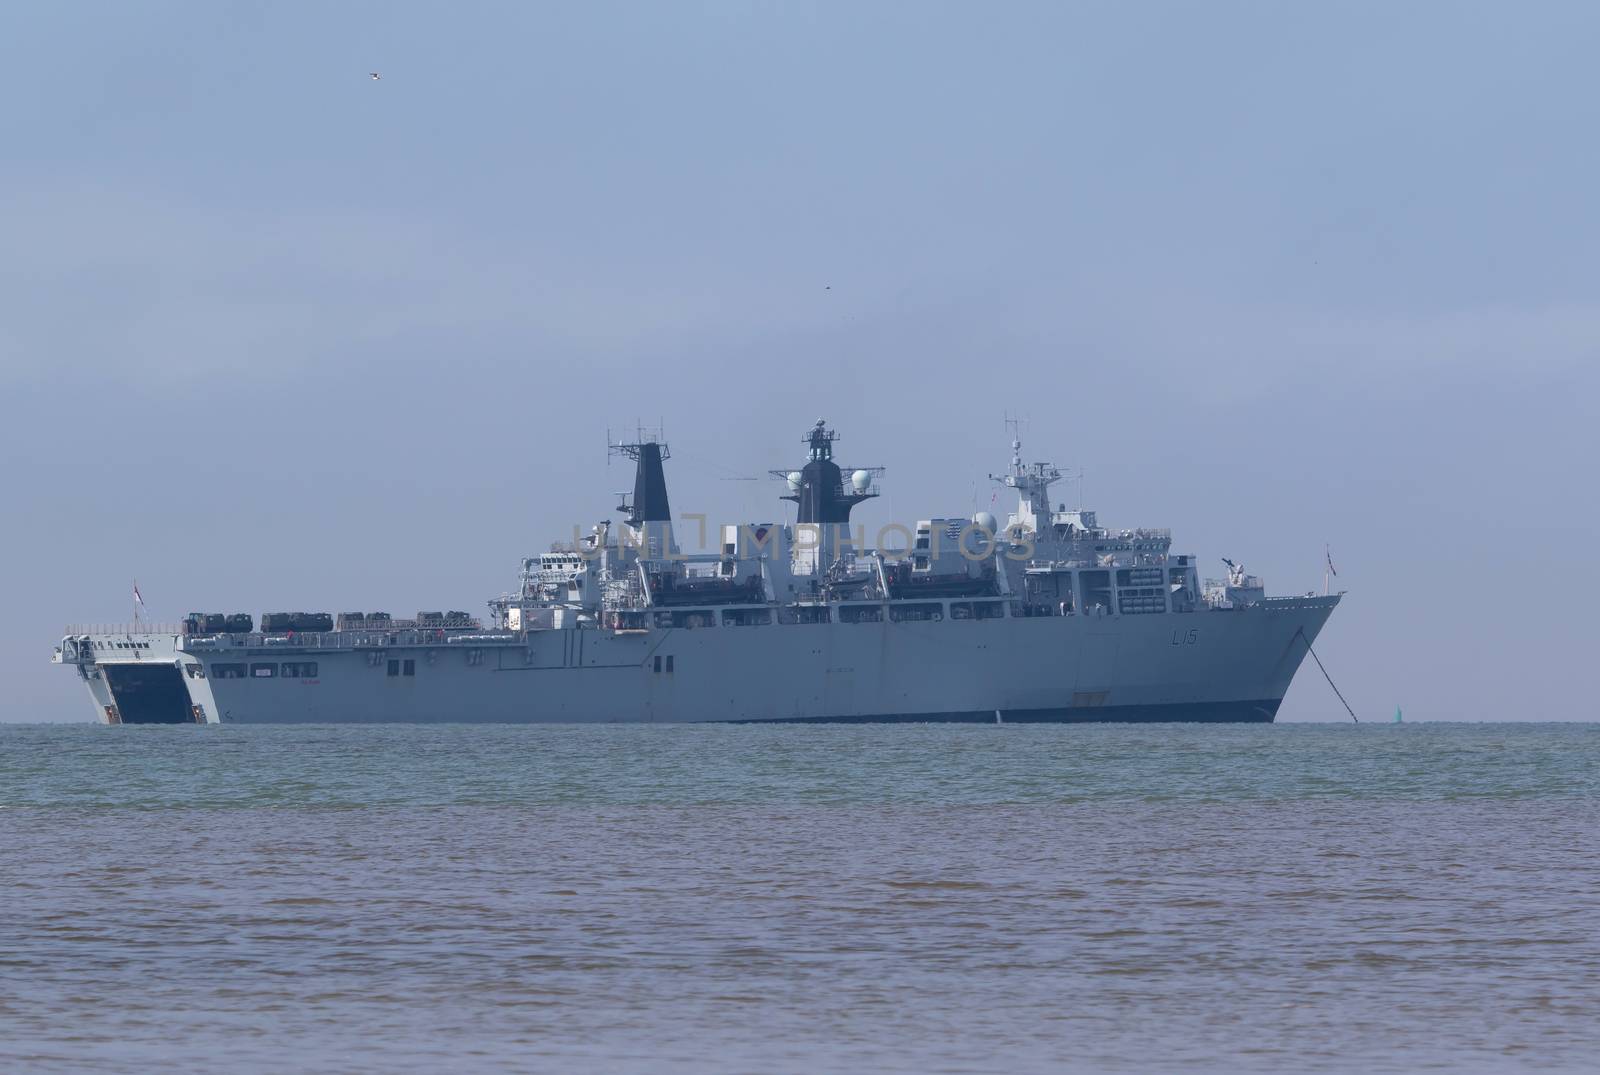 UNITED KINGDOM, Gosport, Hampshire: A ship waits off shore as part of Griffin Strike exercise on April 12, 2016.British and French troops came ashore in a dramatic display that attracted the attention those on the beach. The exercise is a culmination of years of naval cooperation between the two nations, and is intended to test the partnership and readiness between the countries.